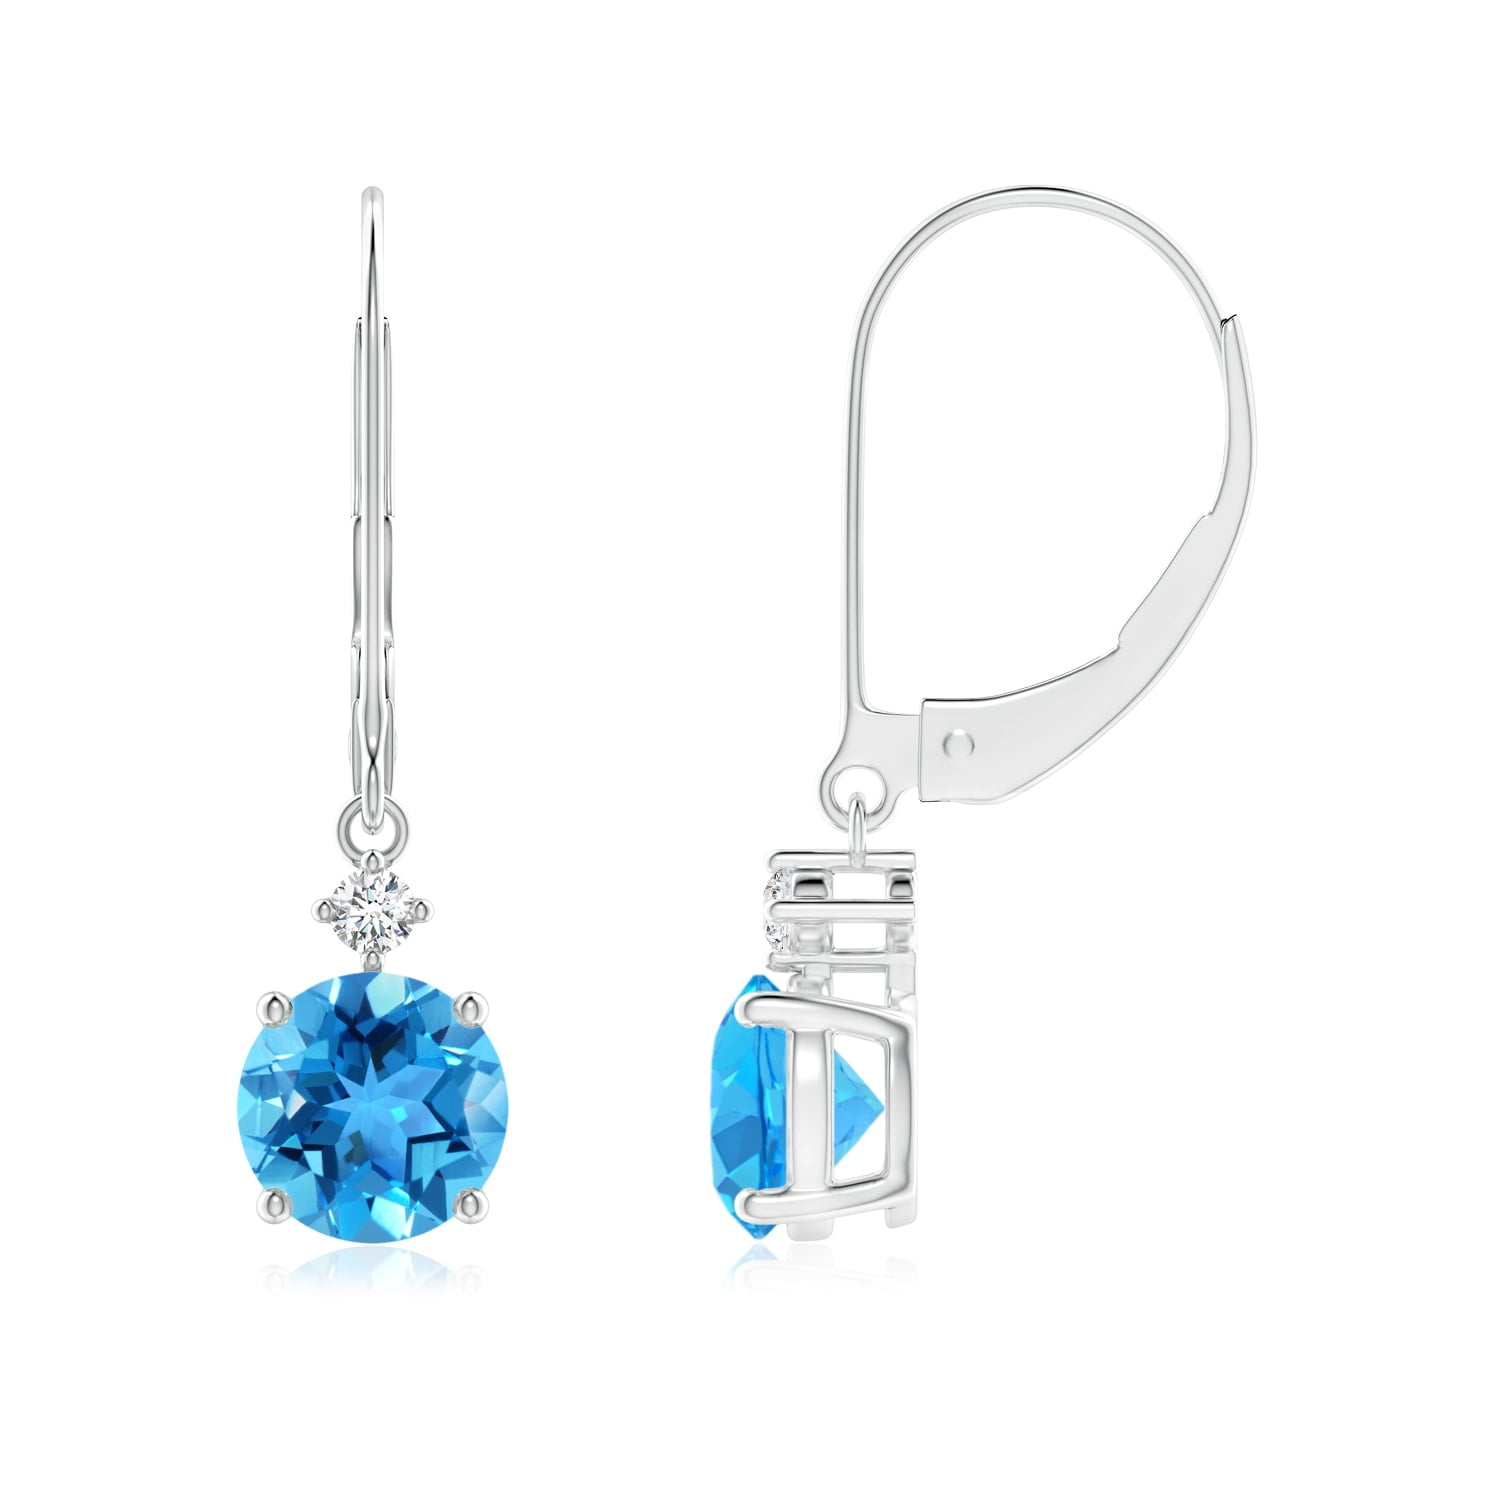 1.9 Carats Solitaire Swiss Blue Topaz Dangle Earrings with Diamond For  Women in 14K White Gold (6mm Blue Topaz)